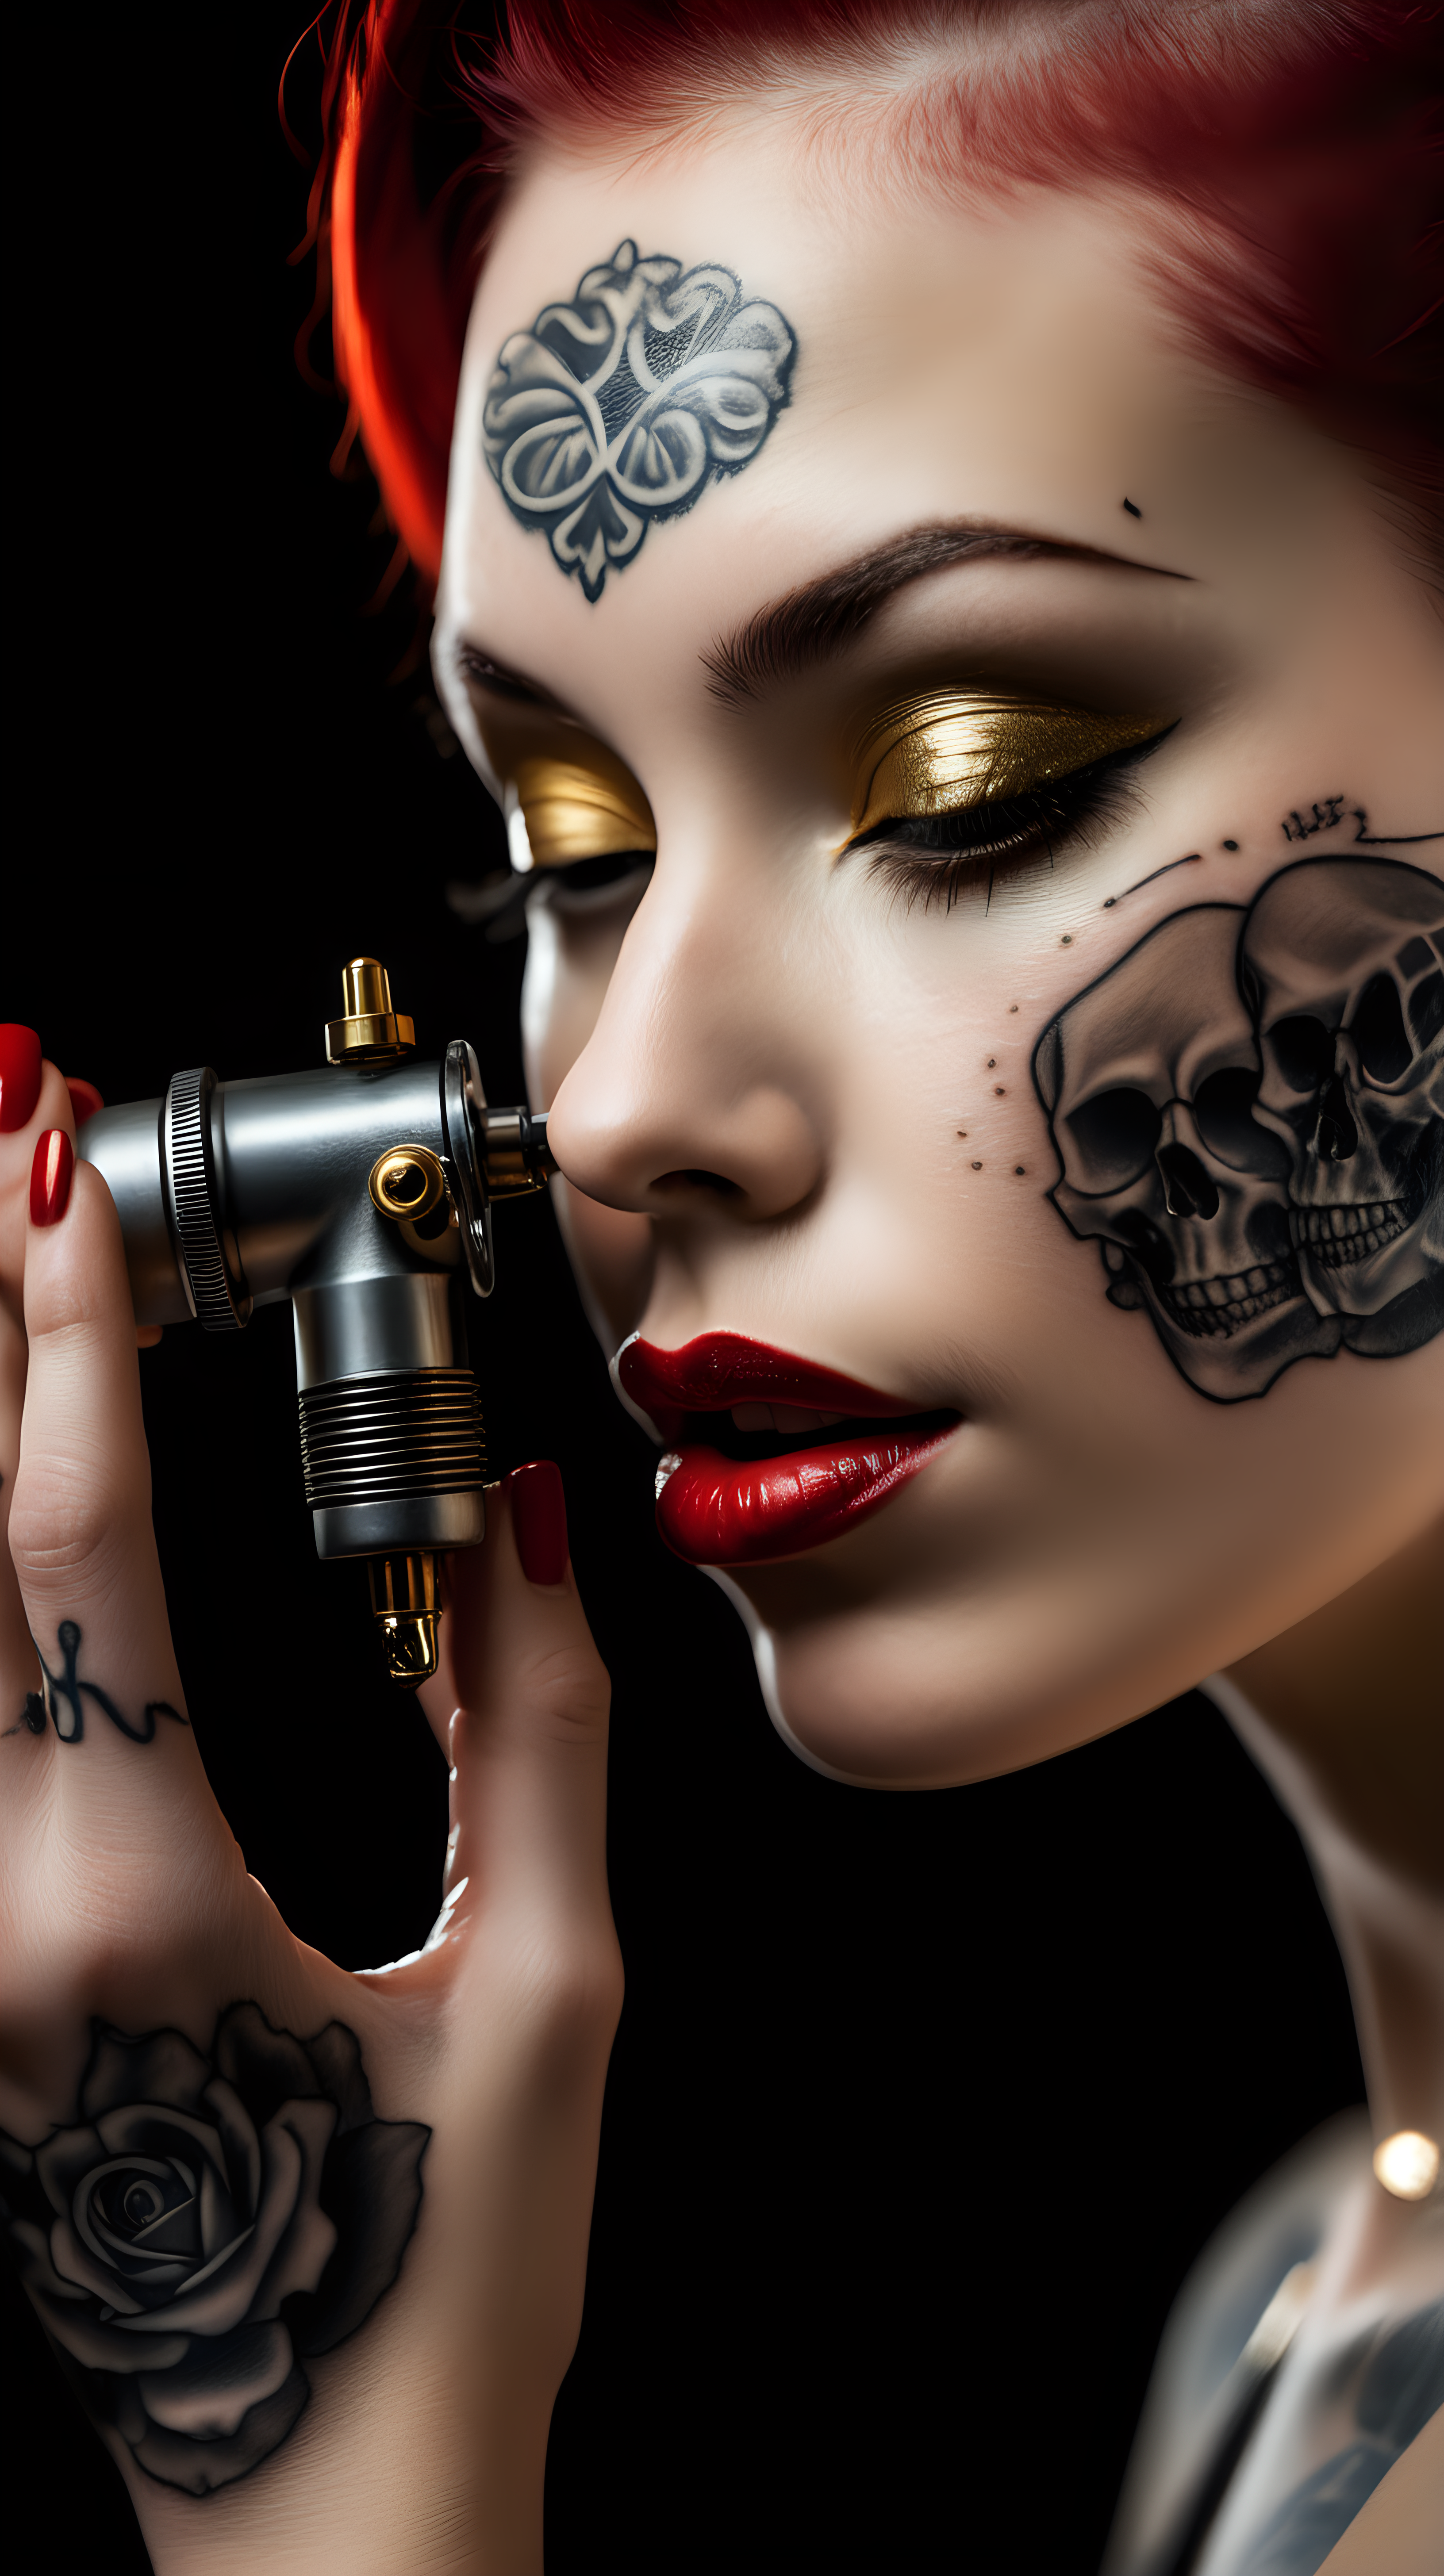 /imagine prompt : An ultra-realistic photograph captured with a canon 5d mark III camera, equipped with an macro lens at F 5.8 aperture setting, The camera is directly in front of the subject, capturing a vintage classic tattoo machine ,a pattern of the skull is engraved on it's golden tattoo grip , grabbed by a hand wearing black nitrile gloves . A beautiful woman whose only lips are visible in the picture is sensually kissing the handle of the tattoo machine with her lips painted with red lipstick.
the hand is blurred and the focus sets on tattoo machine .
Soft spot light gracefully illuminates the subject and golden grip is shining. The background is absolutely black , highlighting the subject.
The image, shot in high resolution and a 16:9 aspect ratio, captures the subject’s  with stunning realism –ar 9:16 –v 5.2 –style raw
